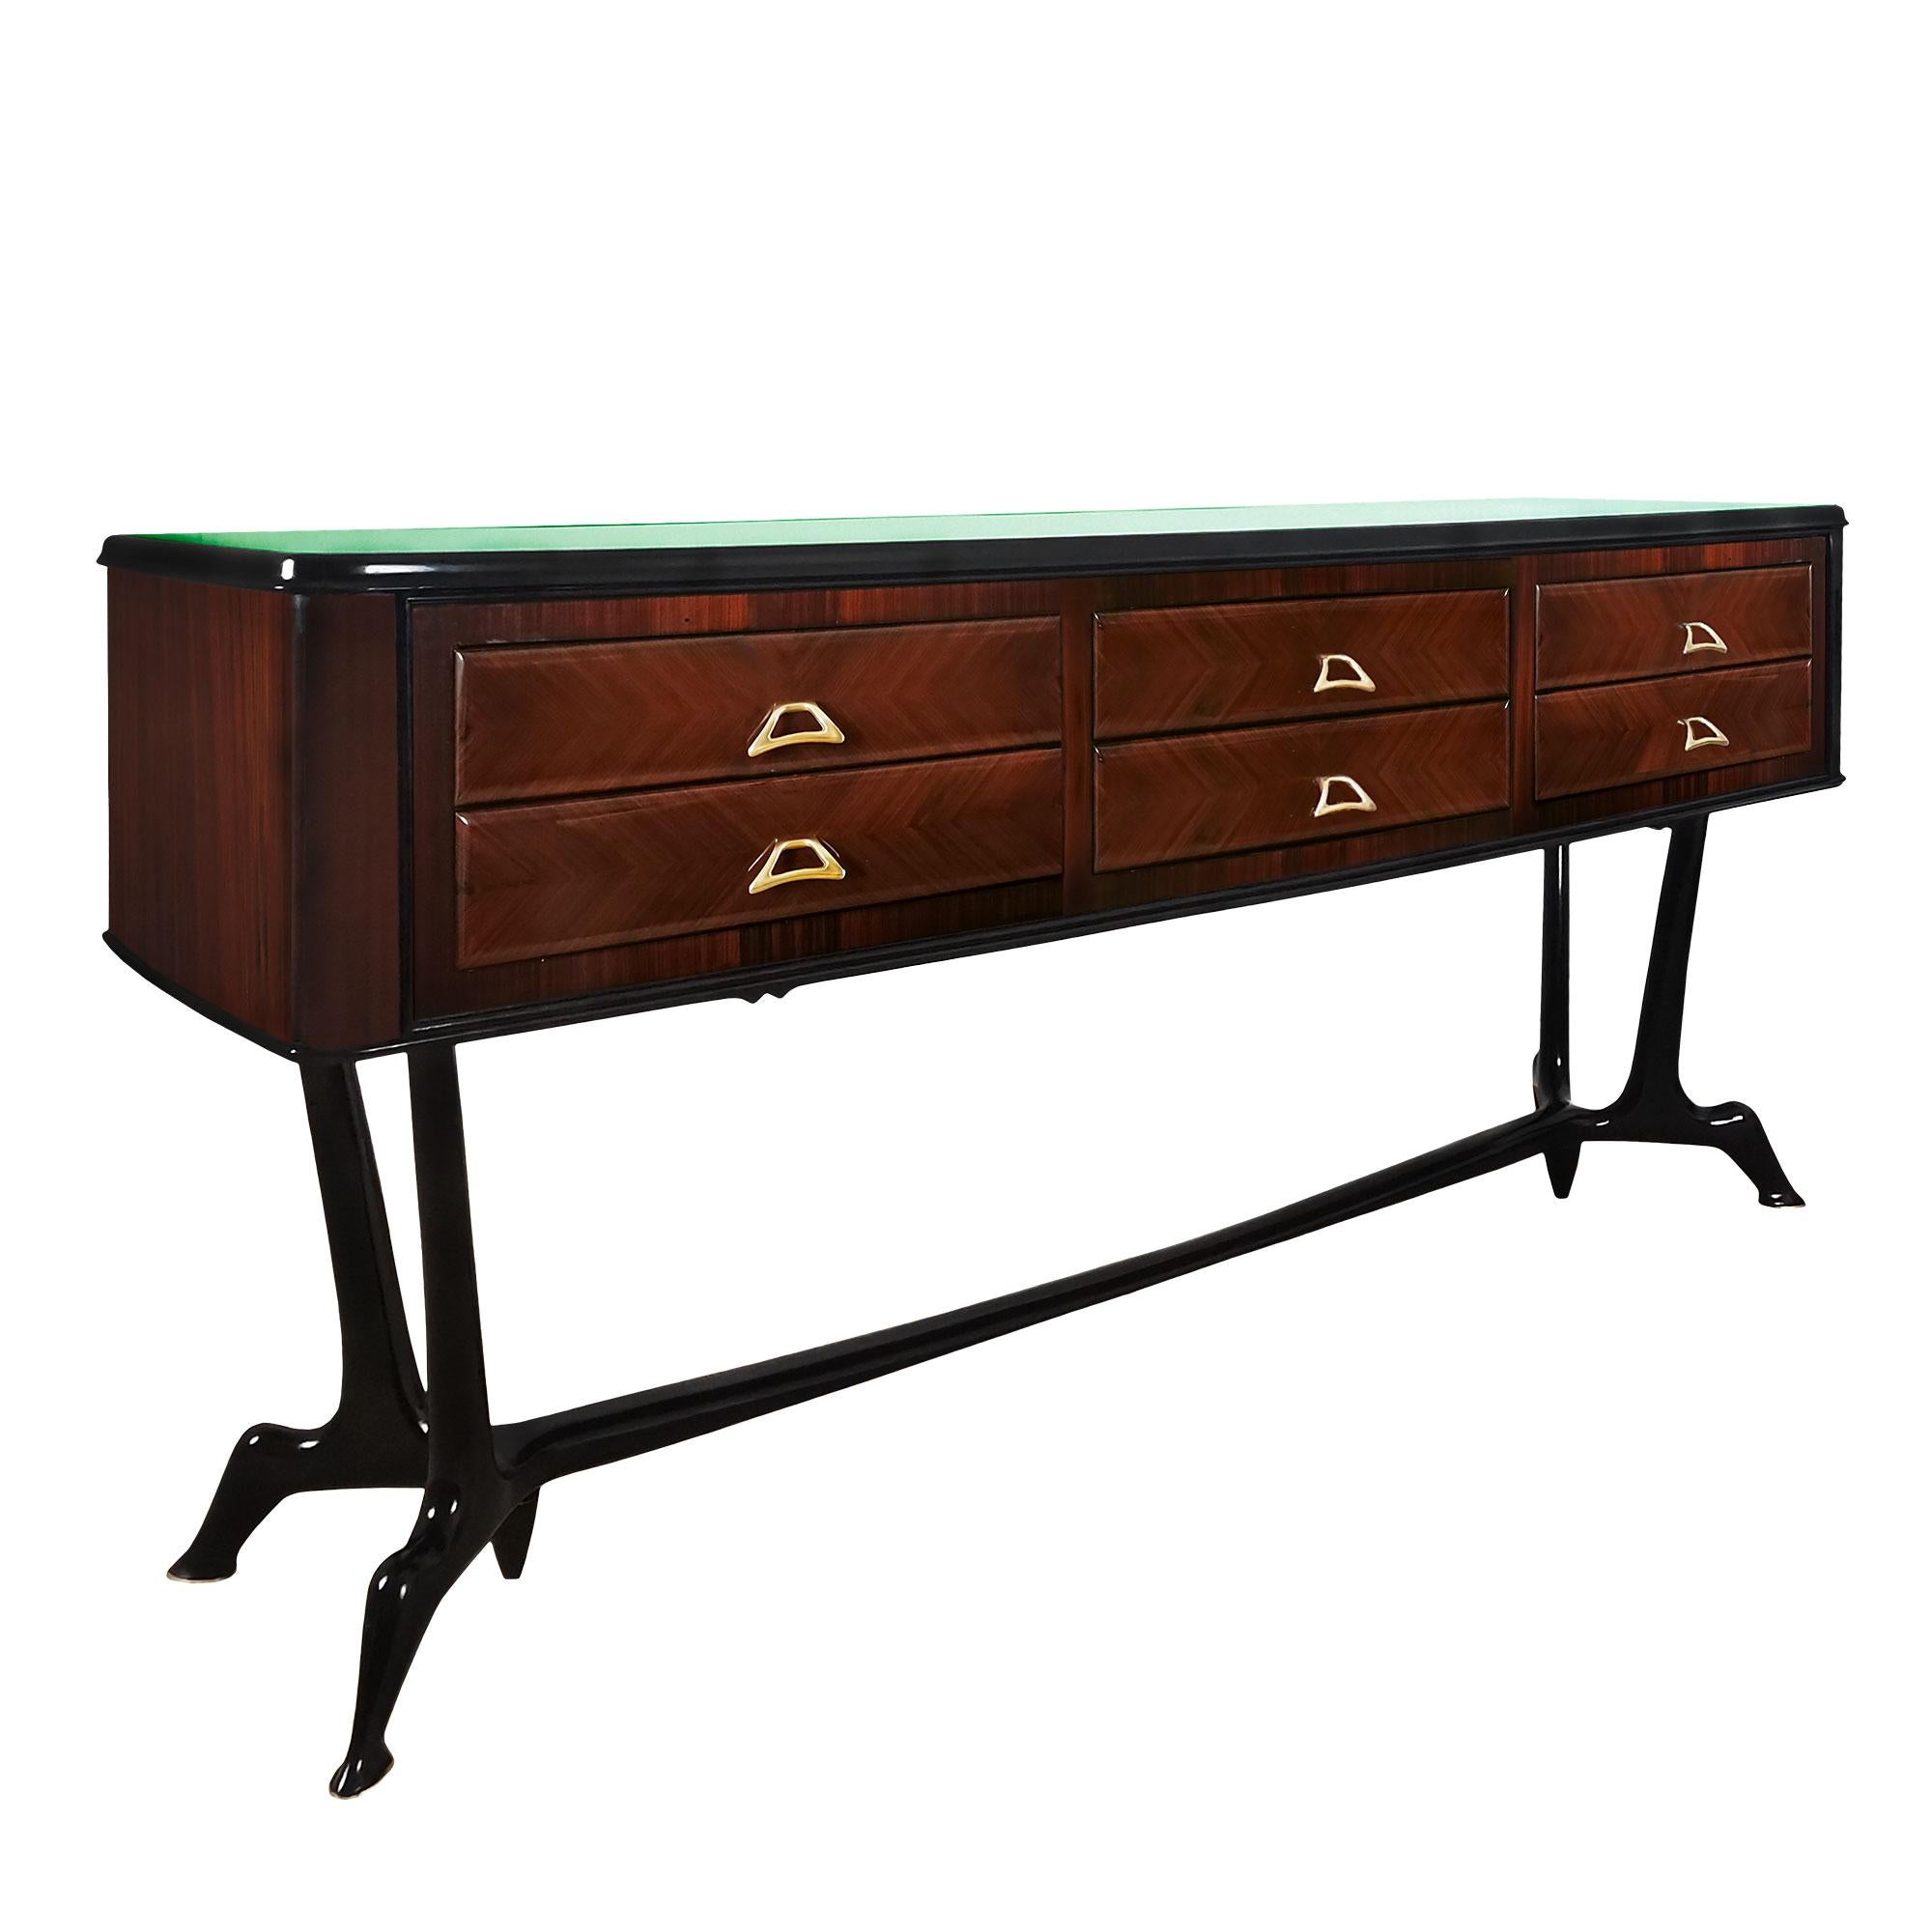 Chest of six drawers in solid wood veneered with walnut, “herringbone” marquetry on the drawers, base in solid stained walnut matching the frame of the original glass top (green in color with a decorative edge). Polished brass knobs and feet